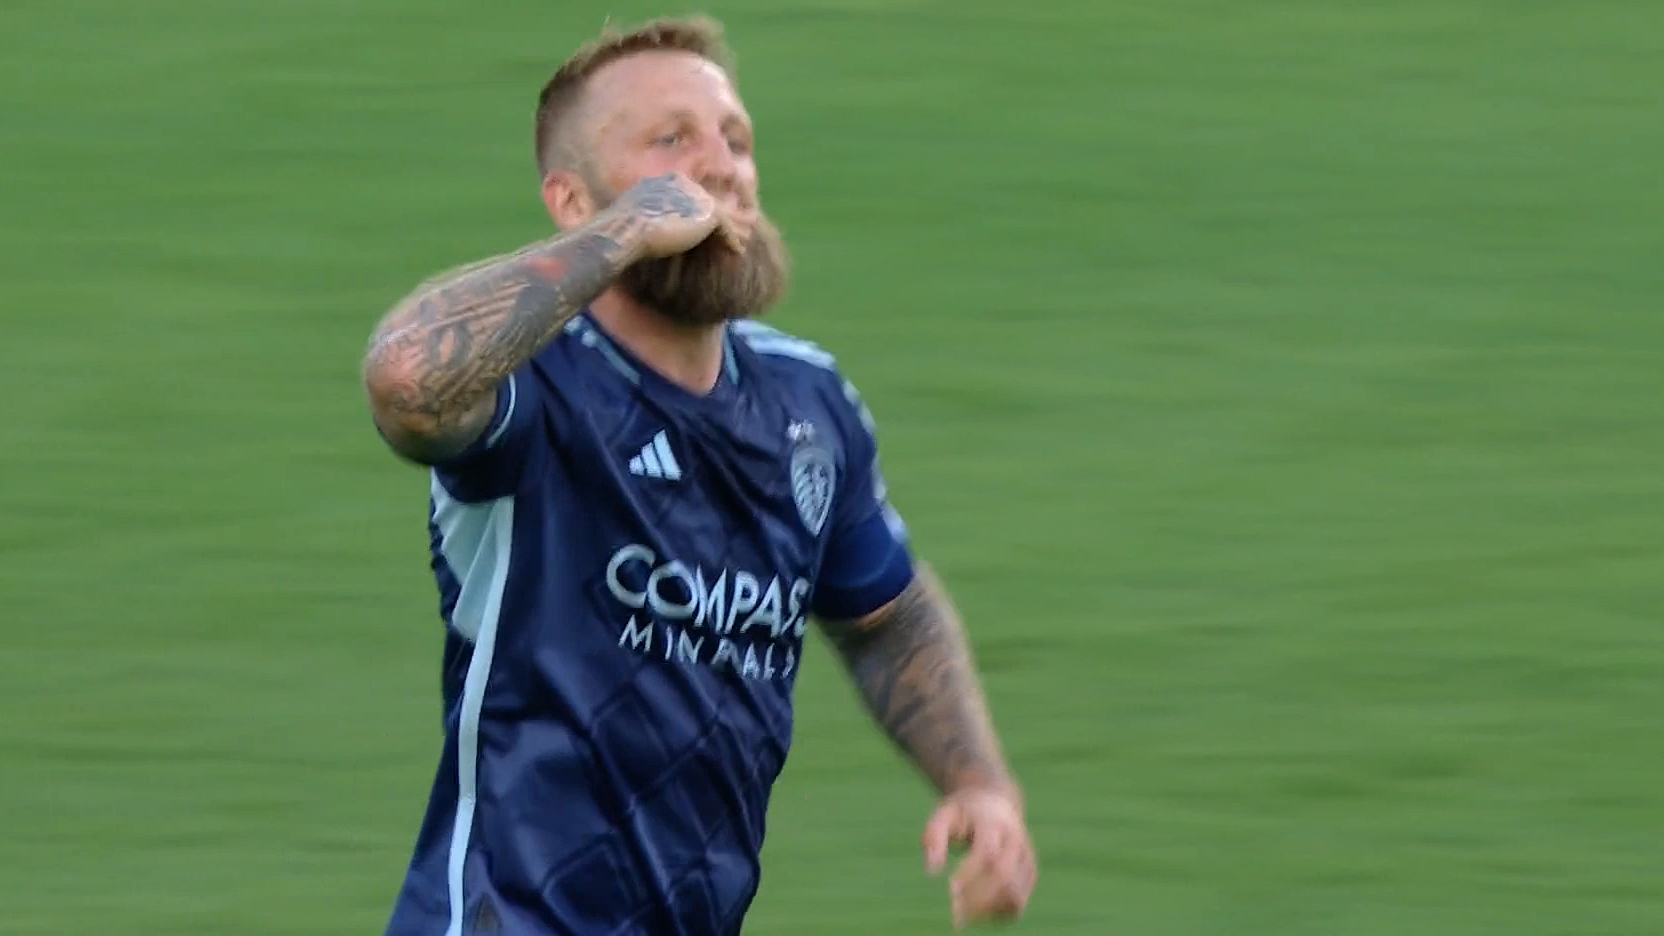 Johnny Russell brings Sporting Kansas City level with great strike